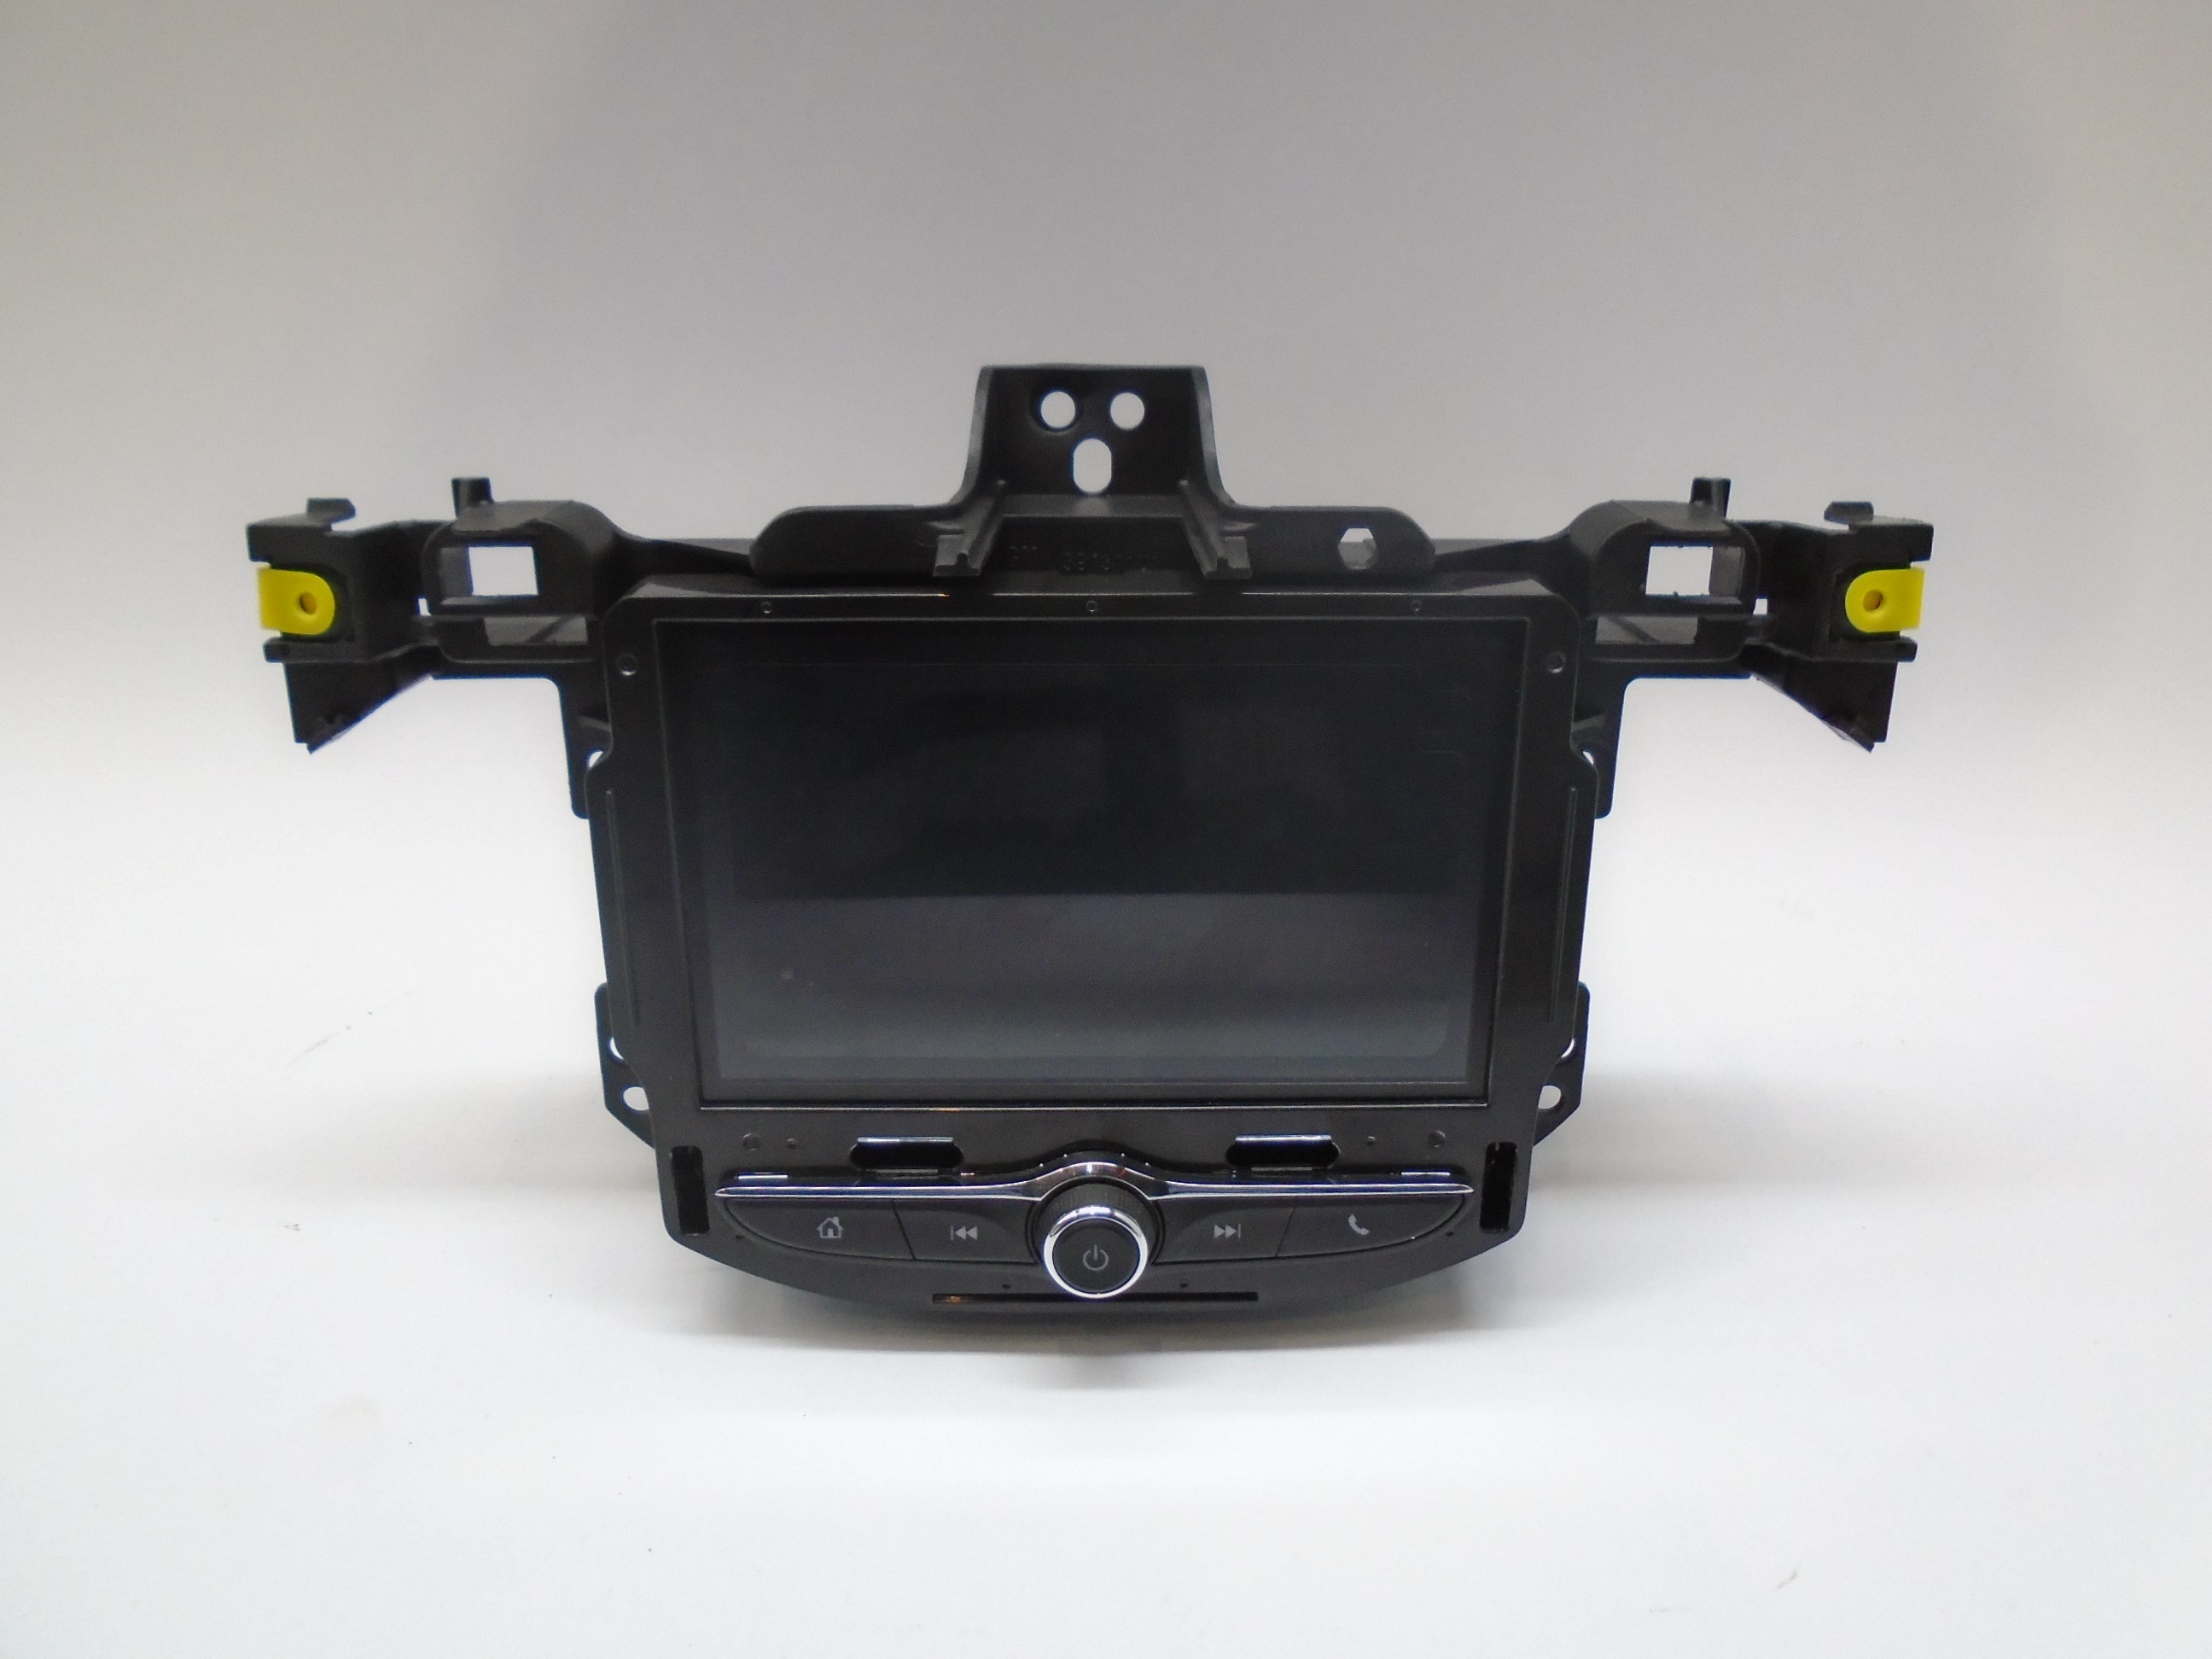 OPEL Corsa D (2006-2020) Other Interior Parts 39193466 25125304